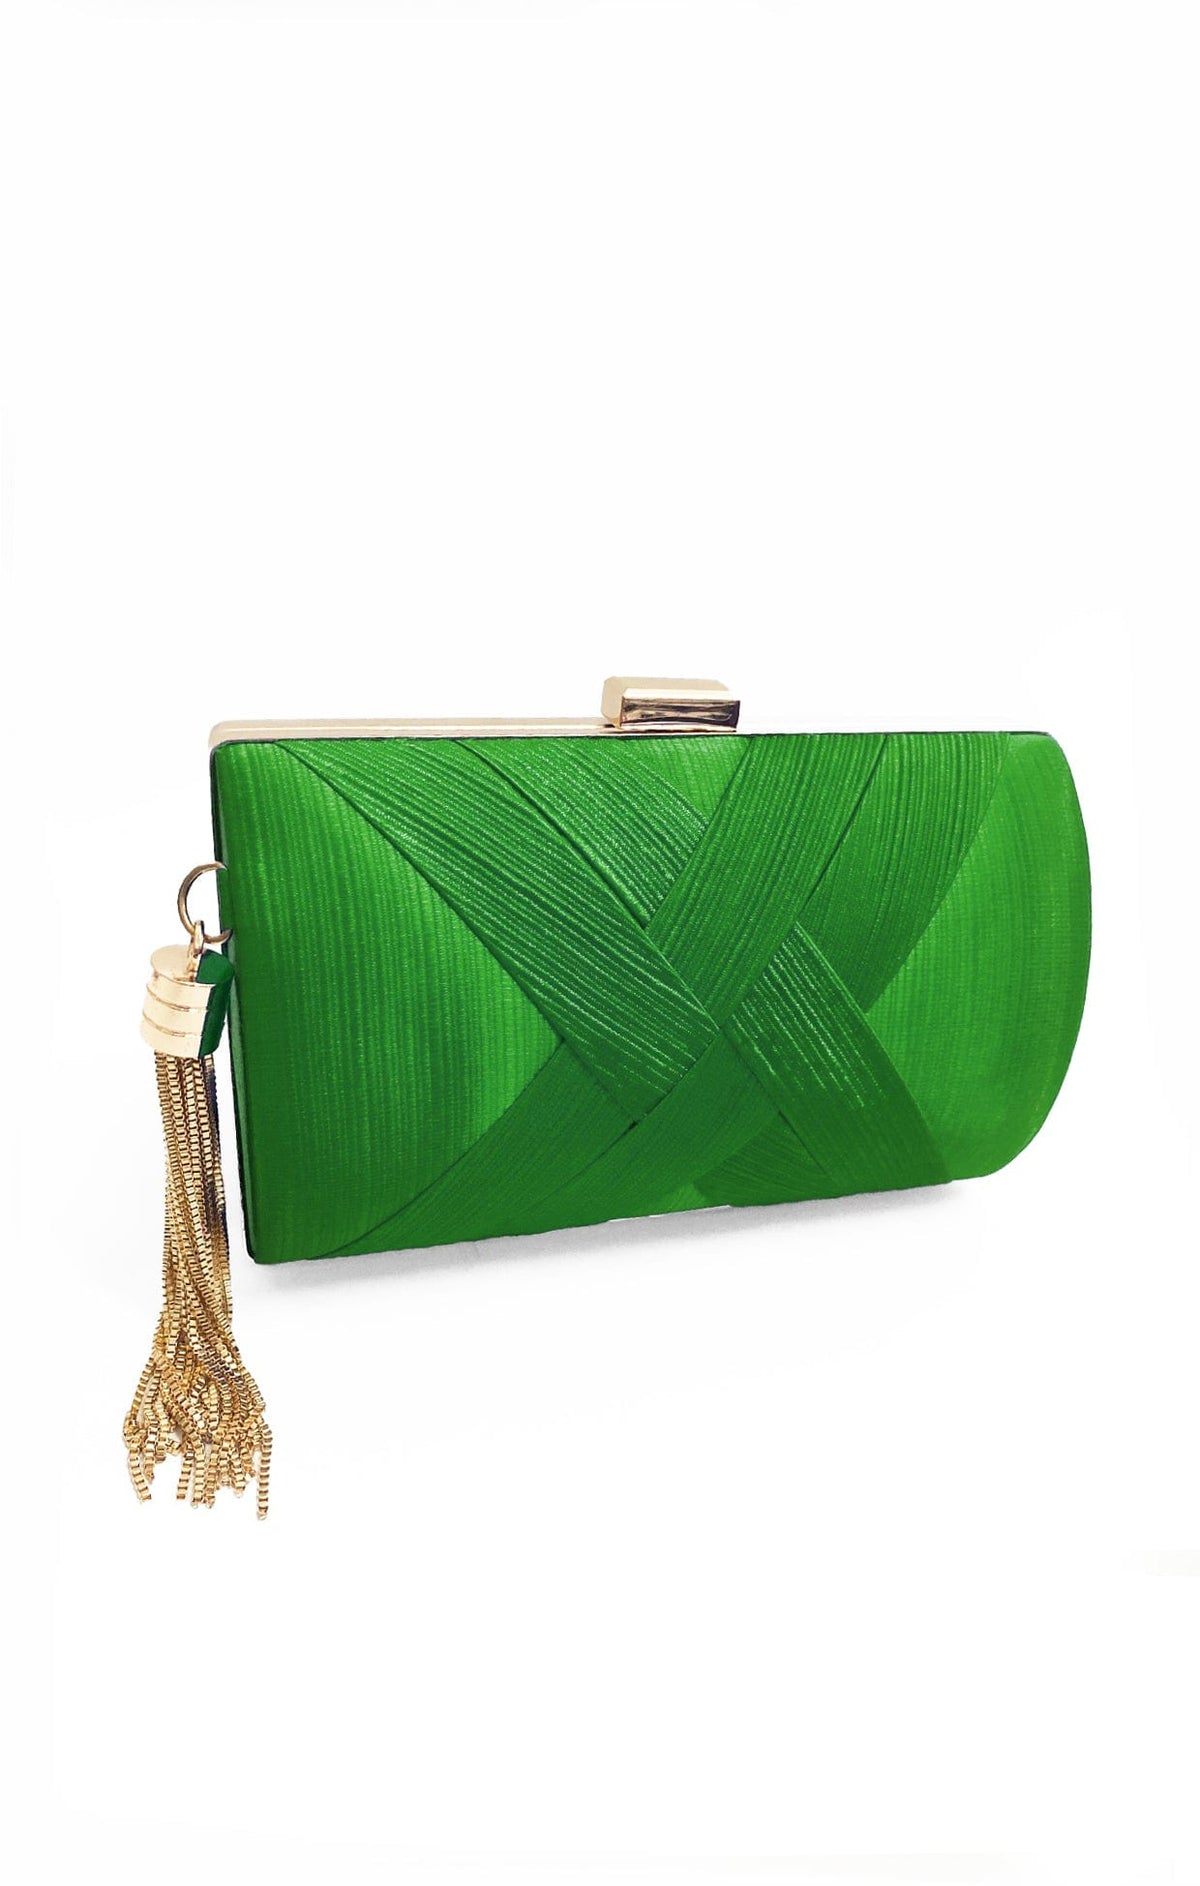 ACCESSORIES Bags Clutches One Size / Green DEANNA EVENING BAG IN LIGHT GREEN